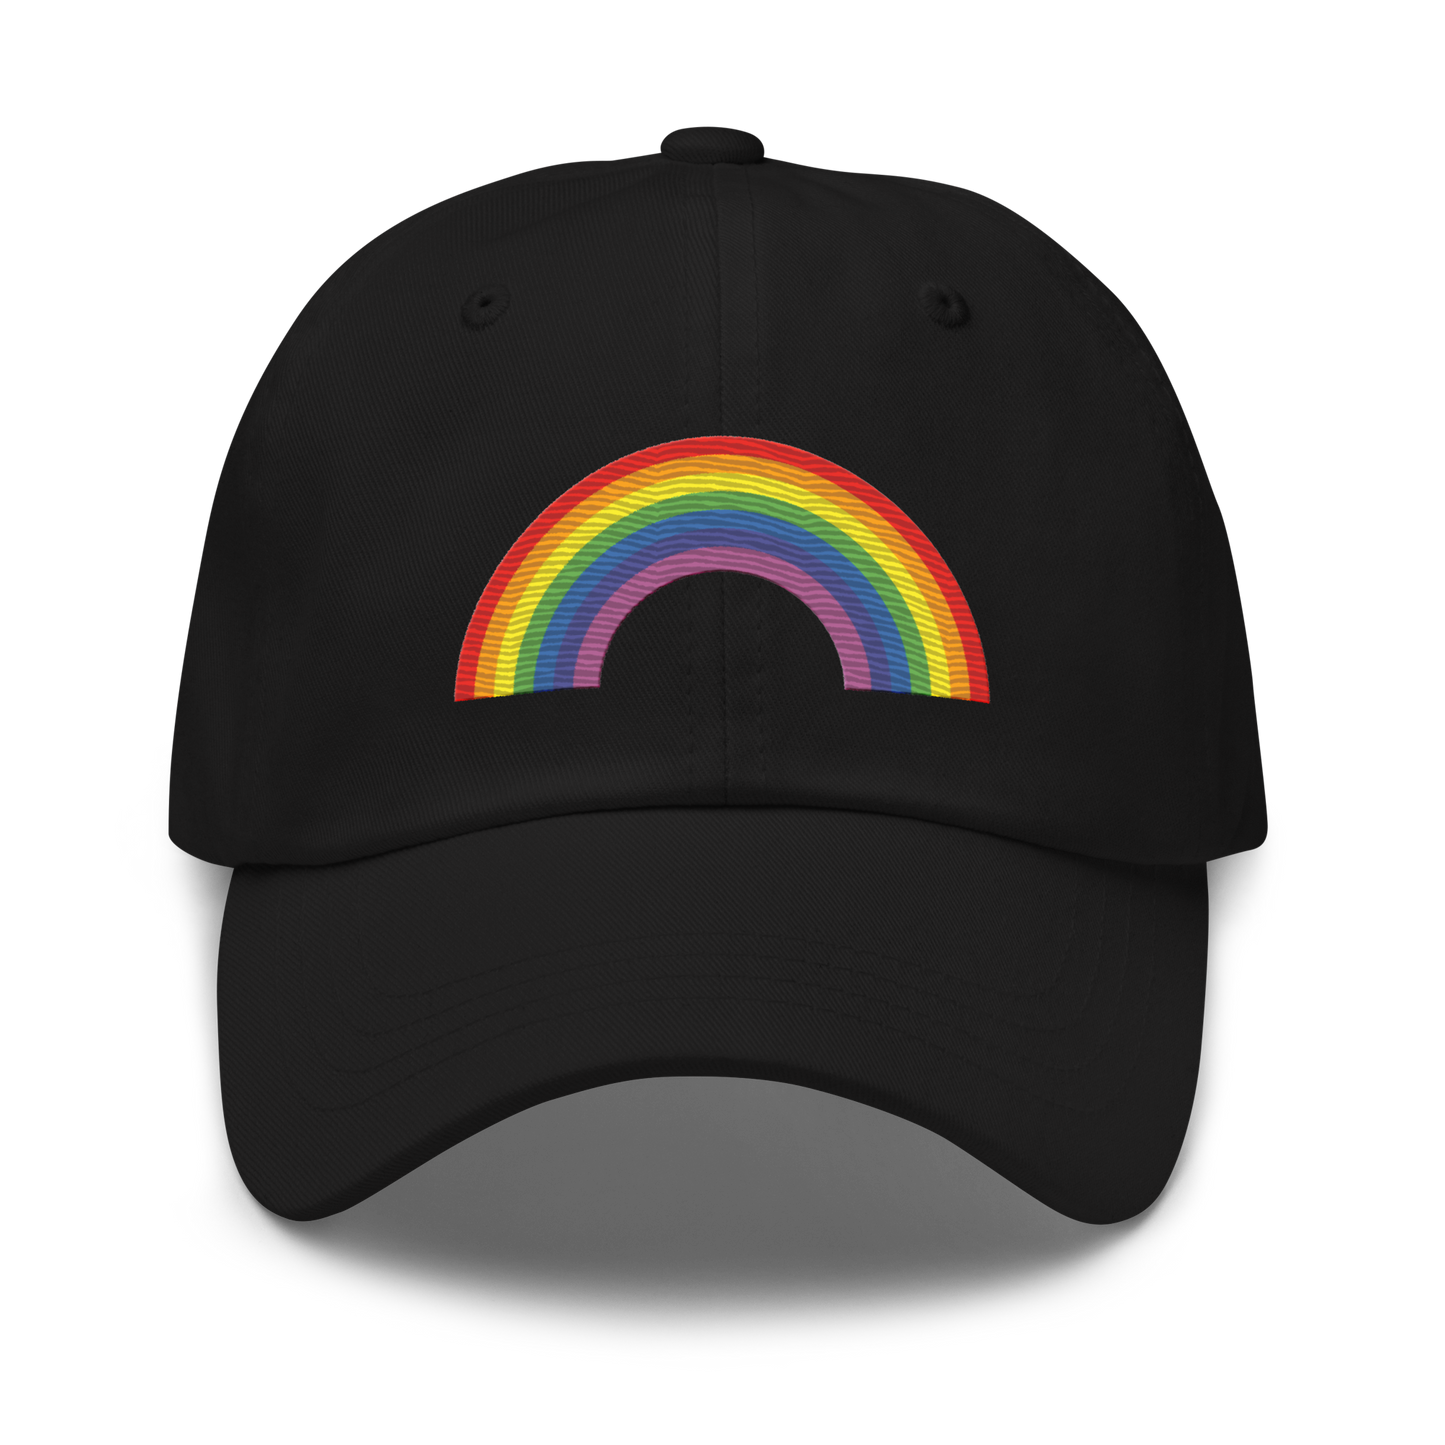 Embroidered Rainbow Hat